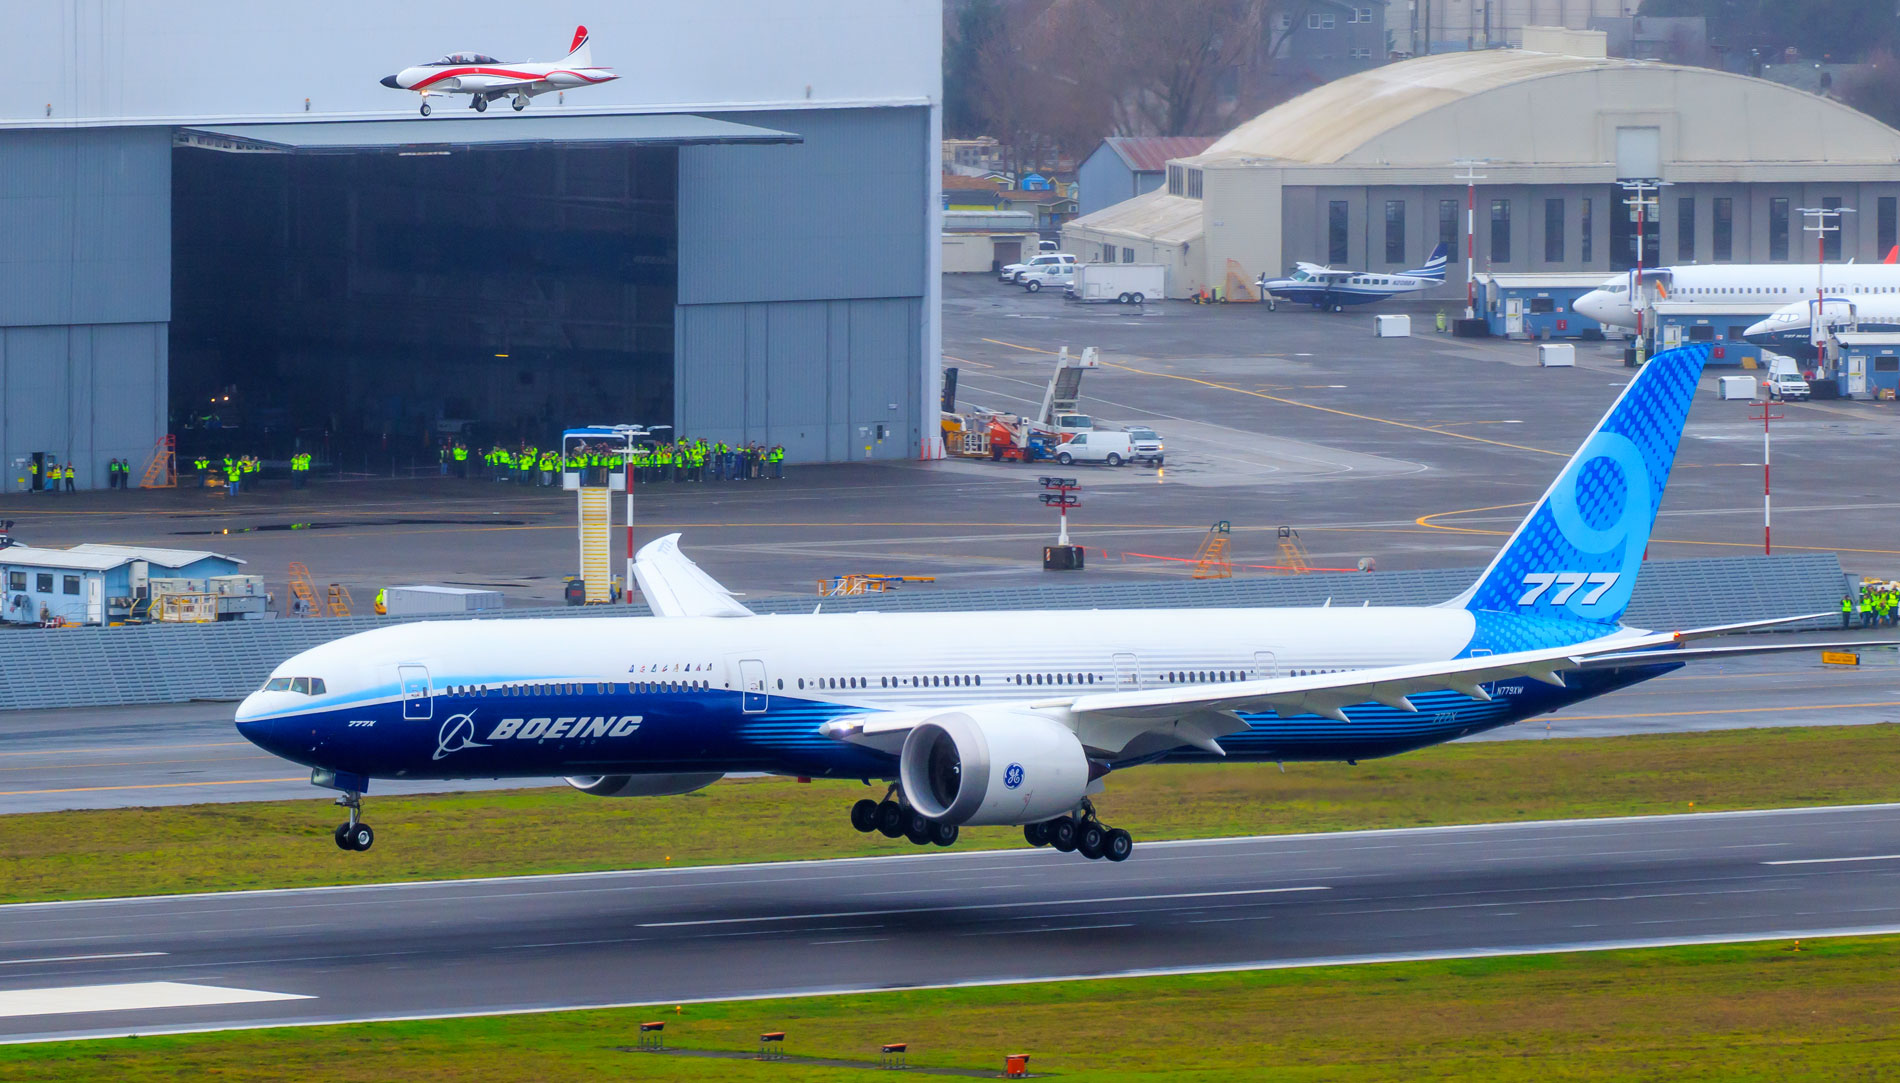 Boeing’s 777X lands at Boeing field in January 2020 to conclude its first flight and a loop around Mount Rainier, accompanied by a Boeing T-33 chase plane.